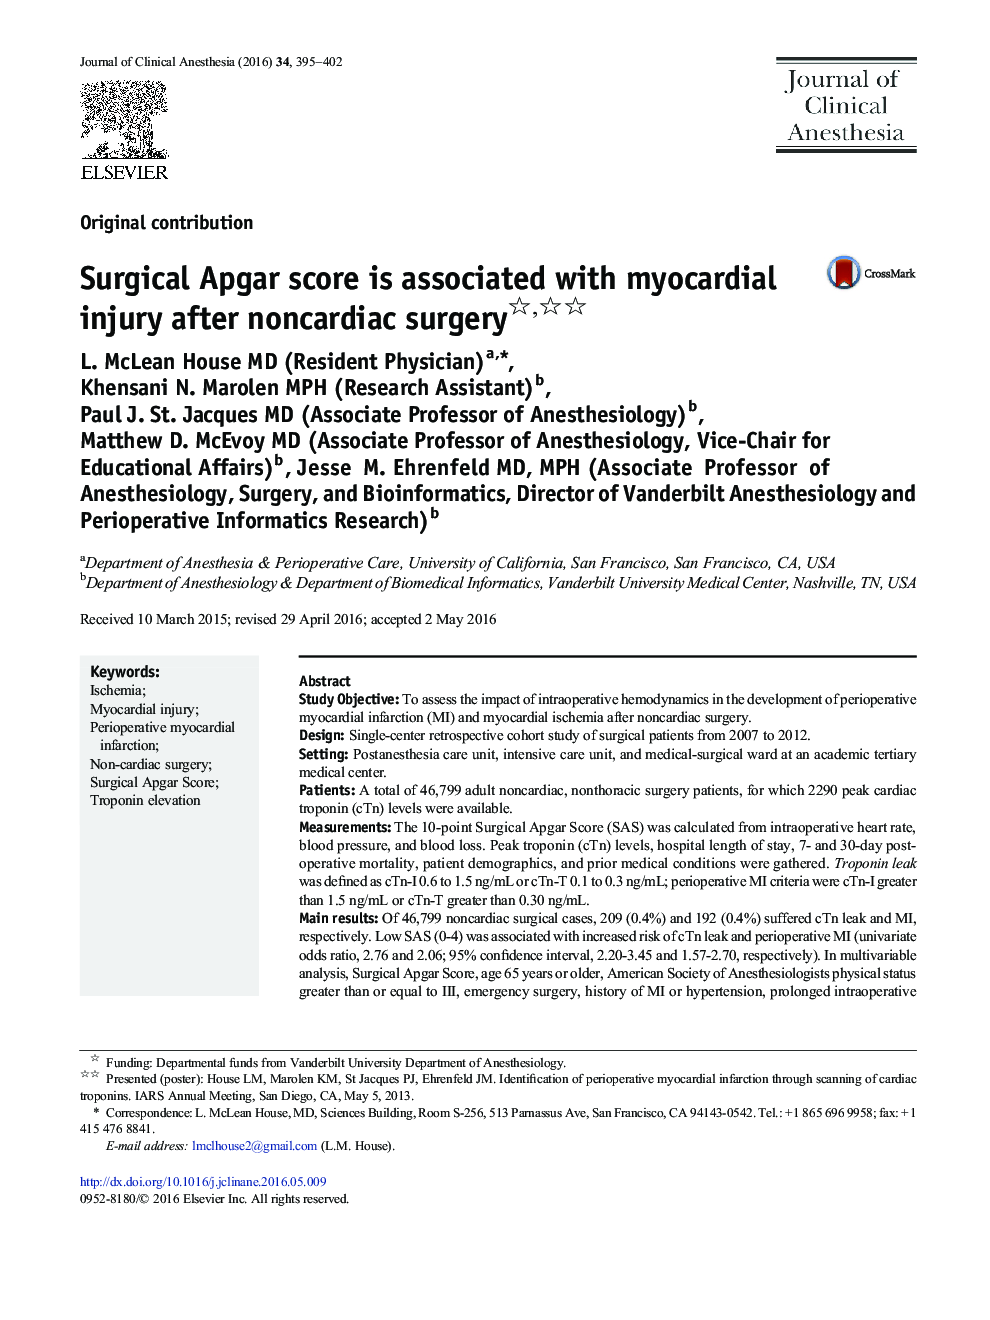 Surgical Apgar score is associated with myocardial injury after noncardiac surgery